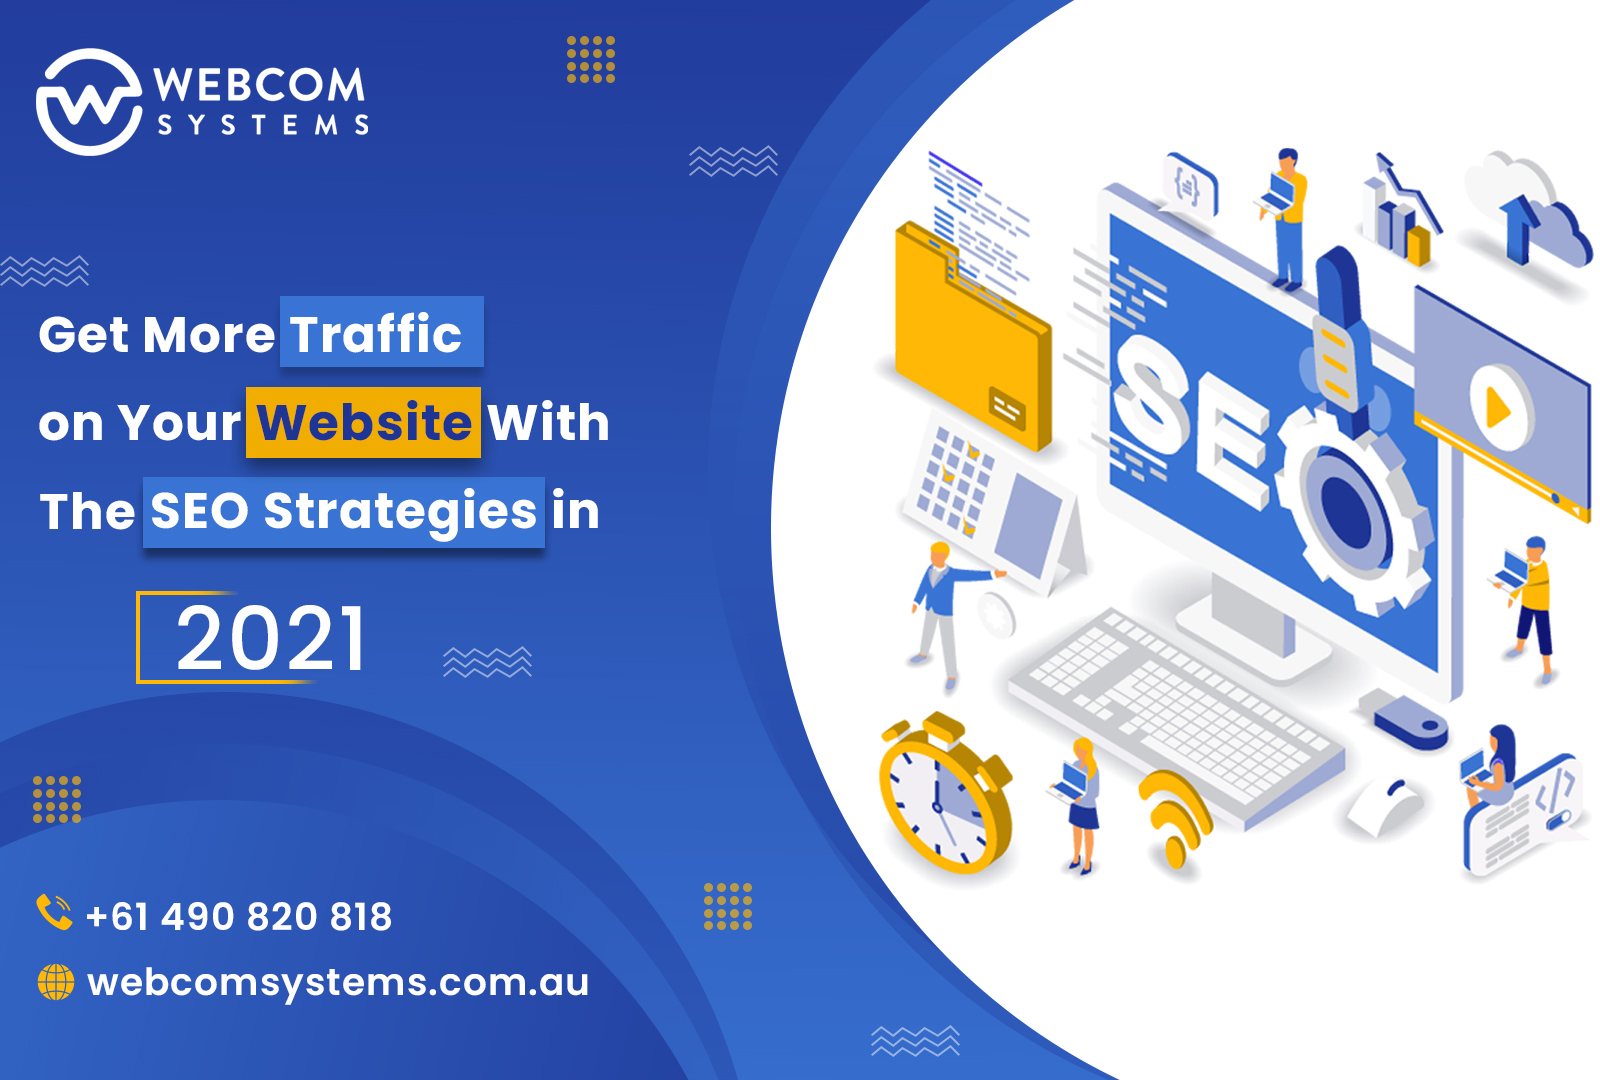 Get More Traffic on your website with the SEO Strategies in 2021